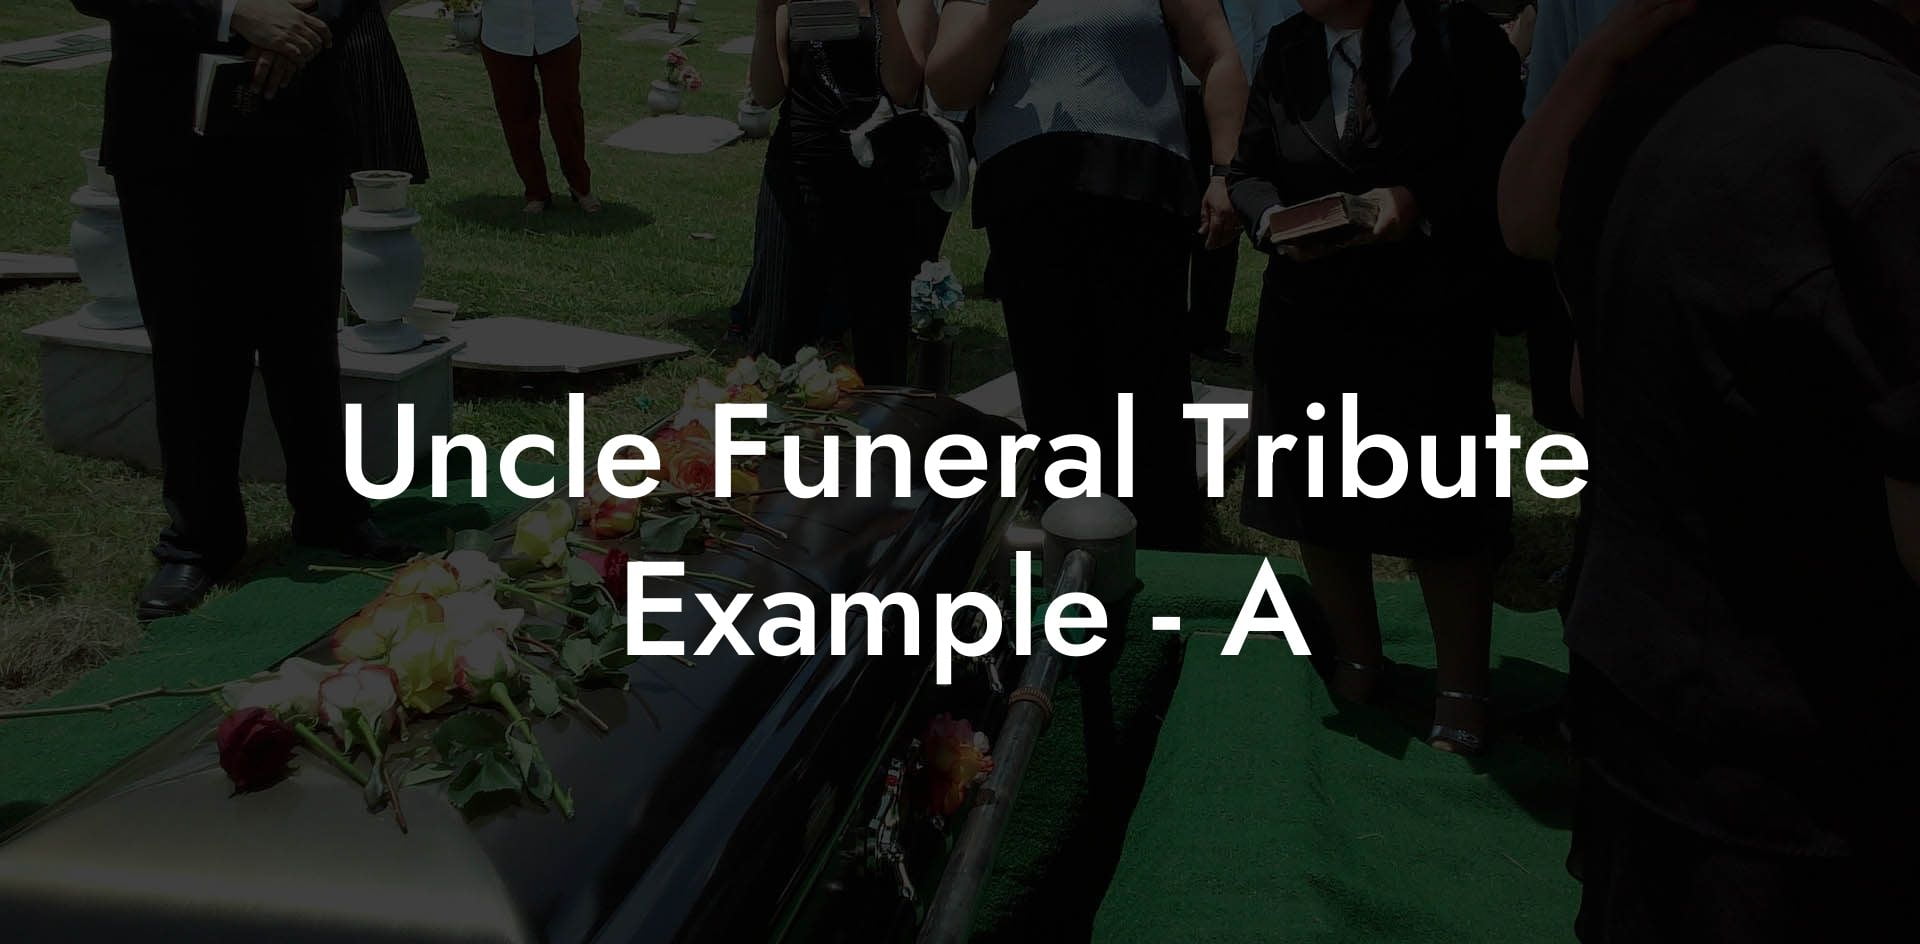 Uncle Funeral Tribute Example   A